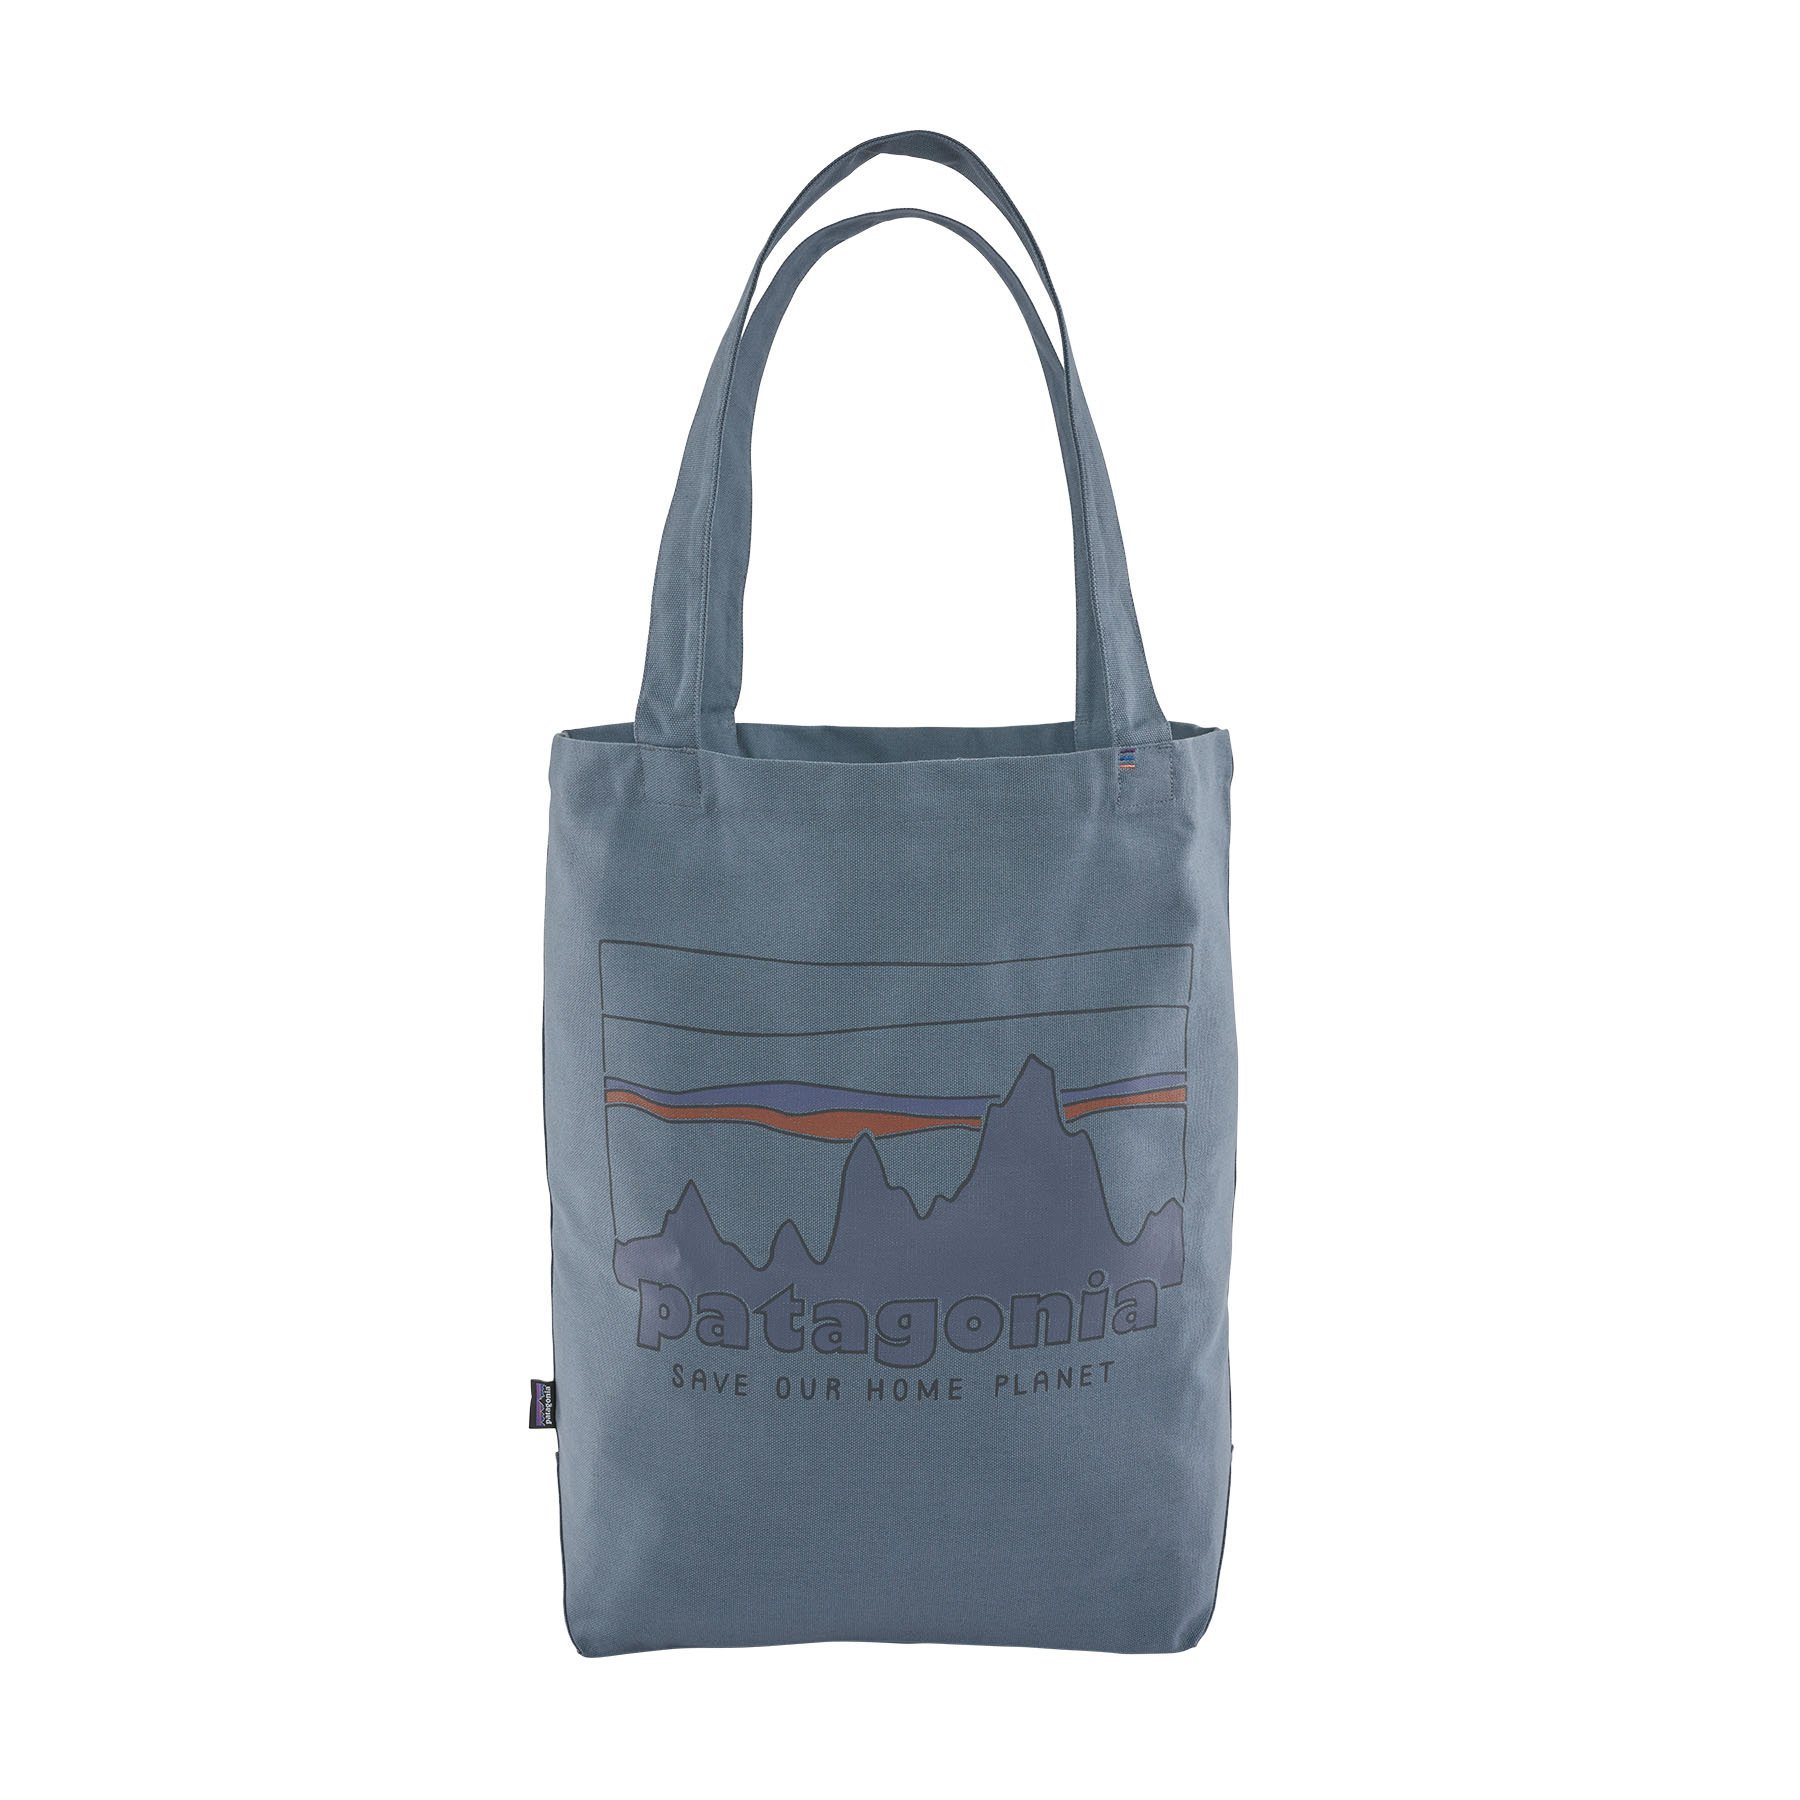 Patagonia Market Tote - Durable Bag from Organic Cotton, 73 Skyline: Plume Grey